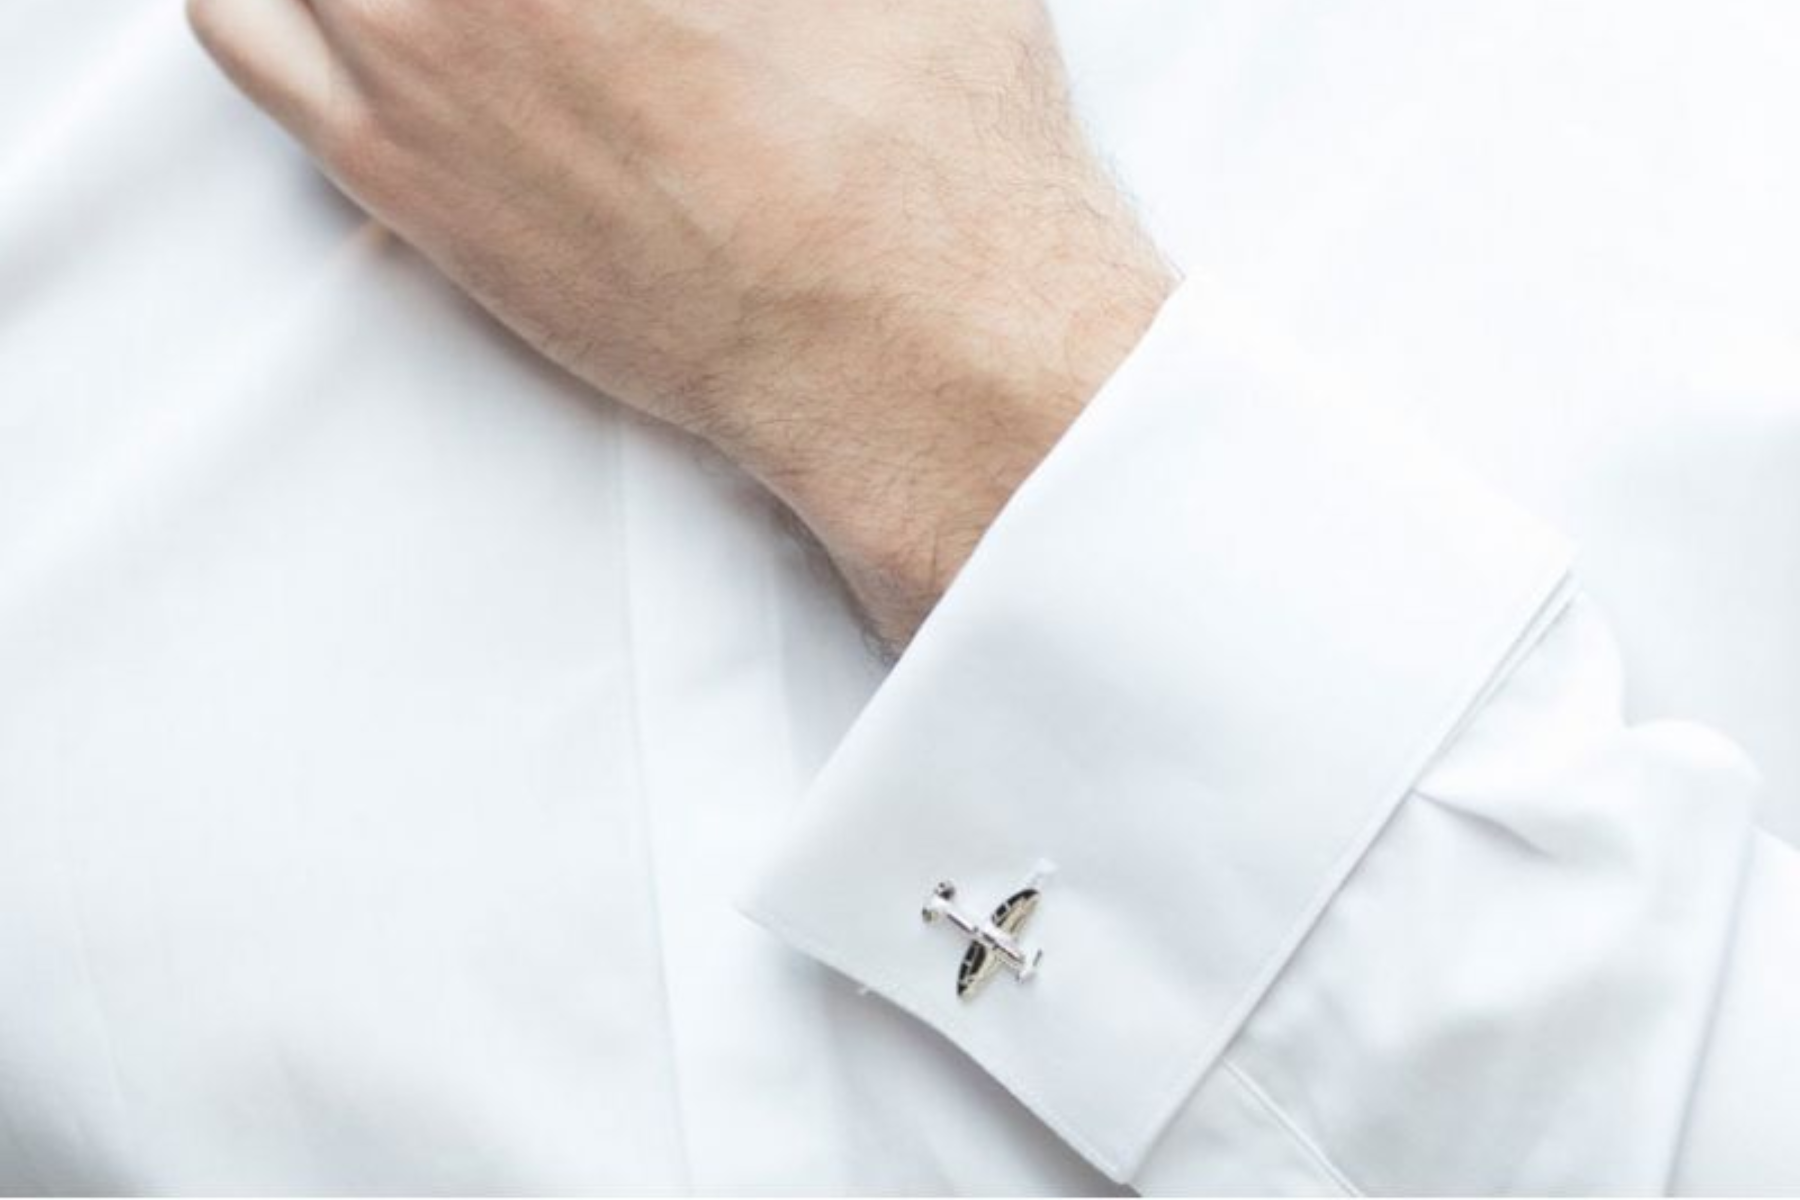 A man wearing a white long sleeve shirt with airplane cufflinks in silver